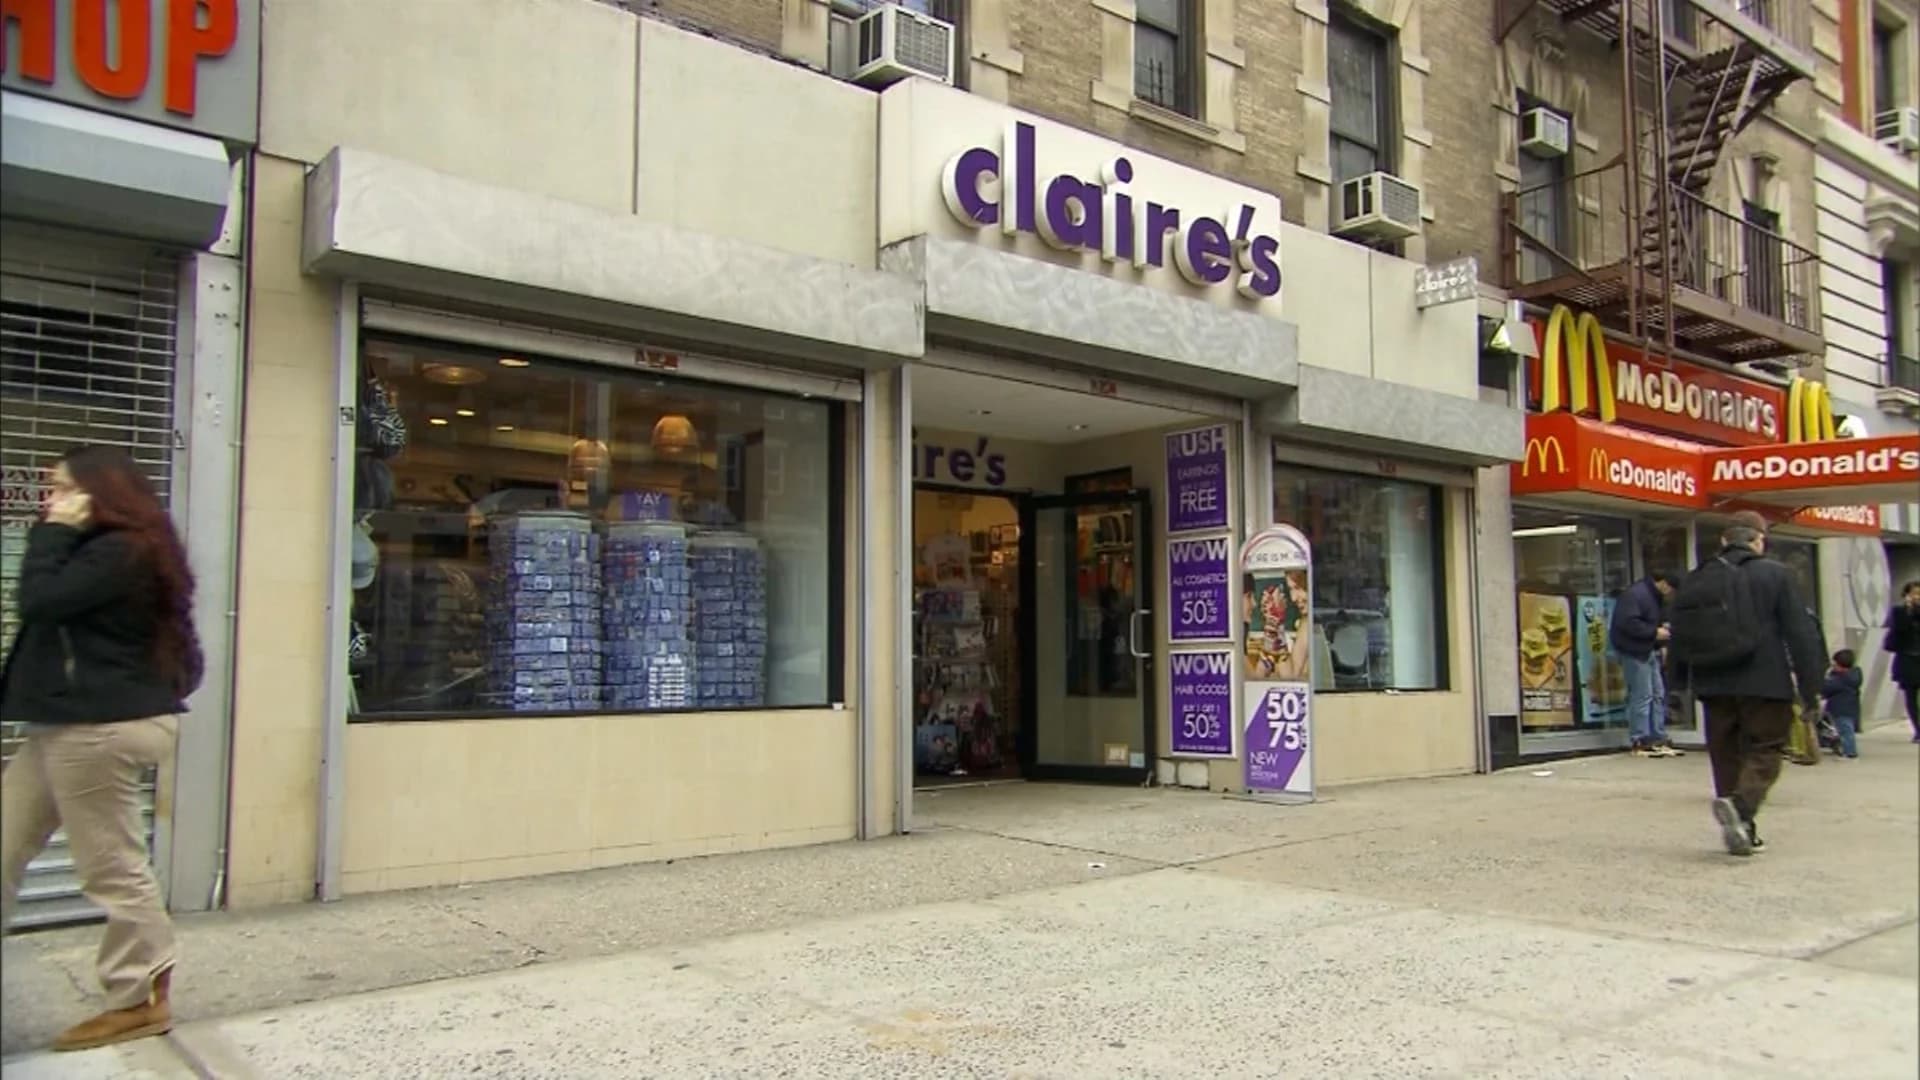 FDA: Certain makeup products from Claire's, Justice test positive for asbestos